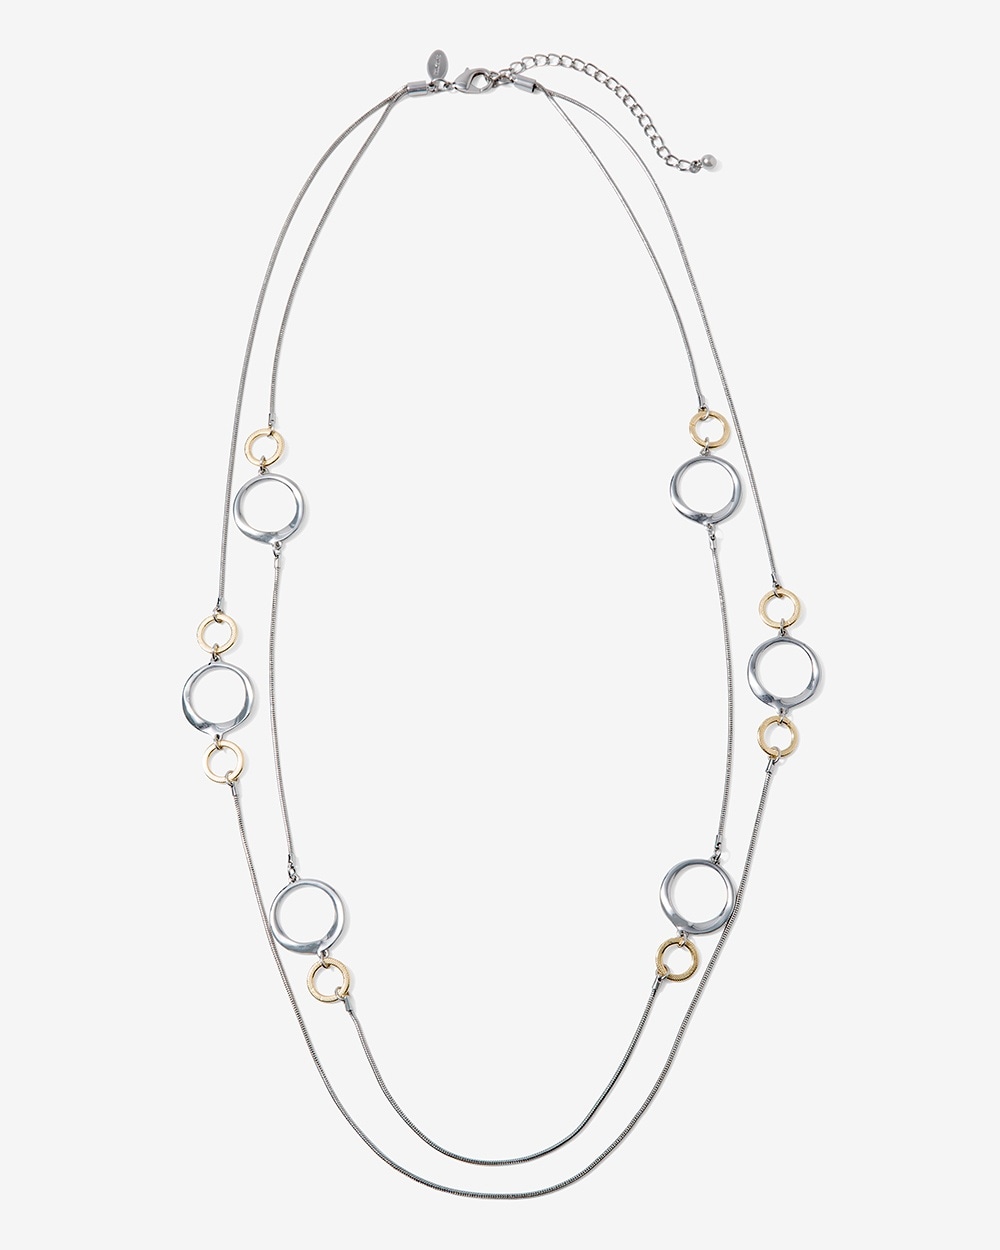 Two-Tone Rings Necklace